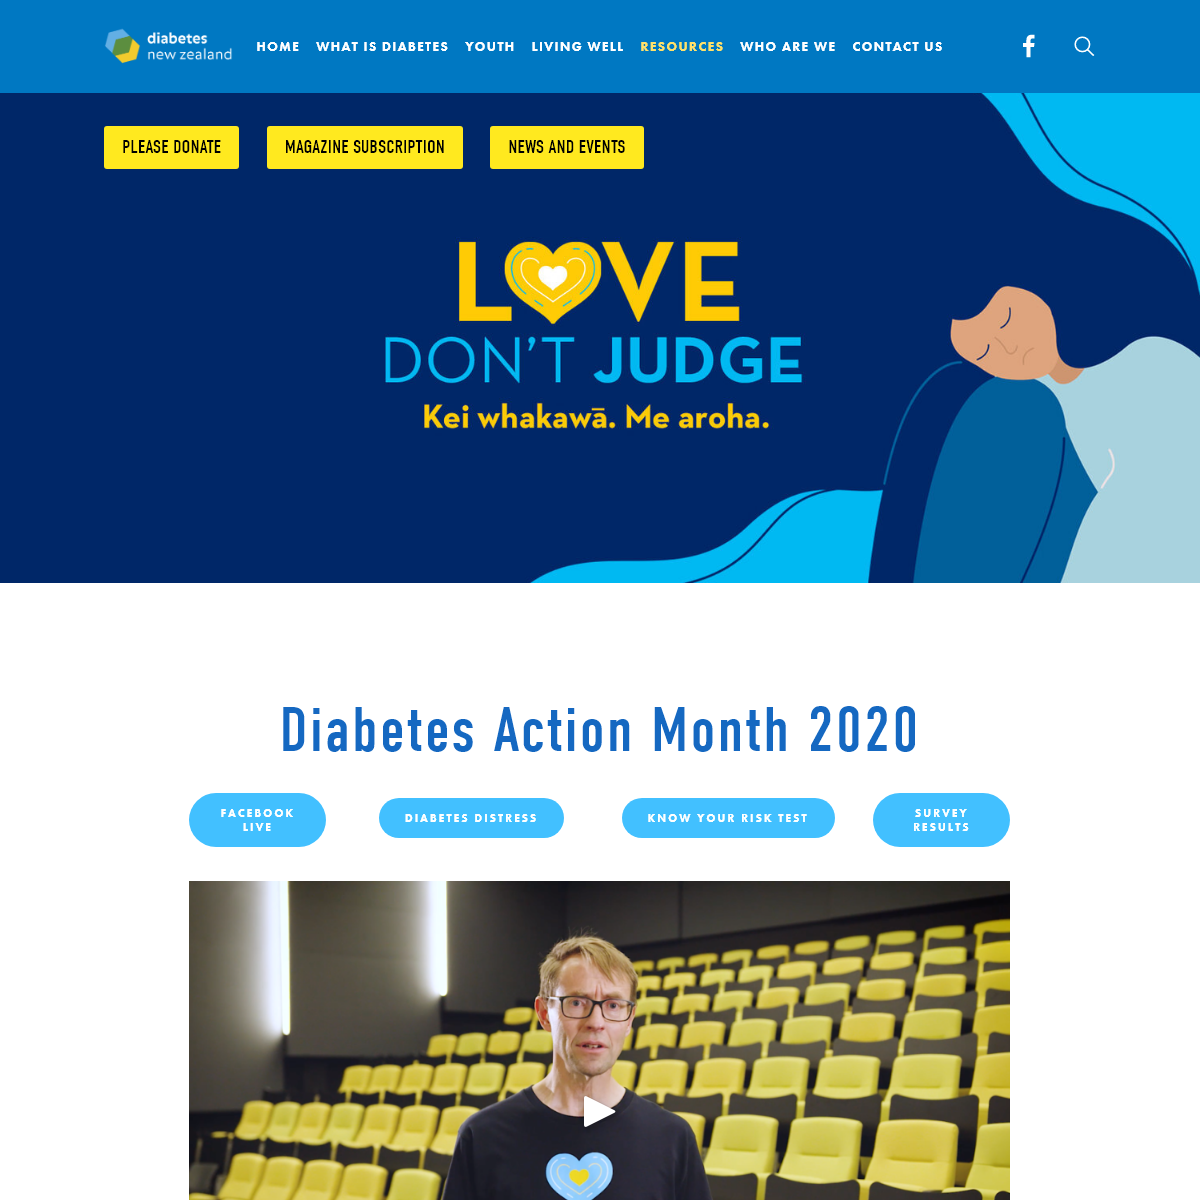 A complete backup of diabetes.org.nz